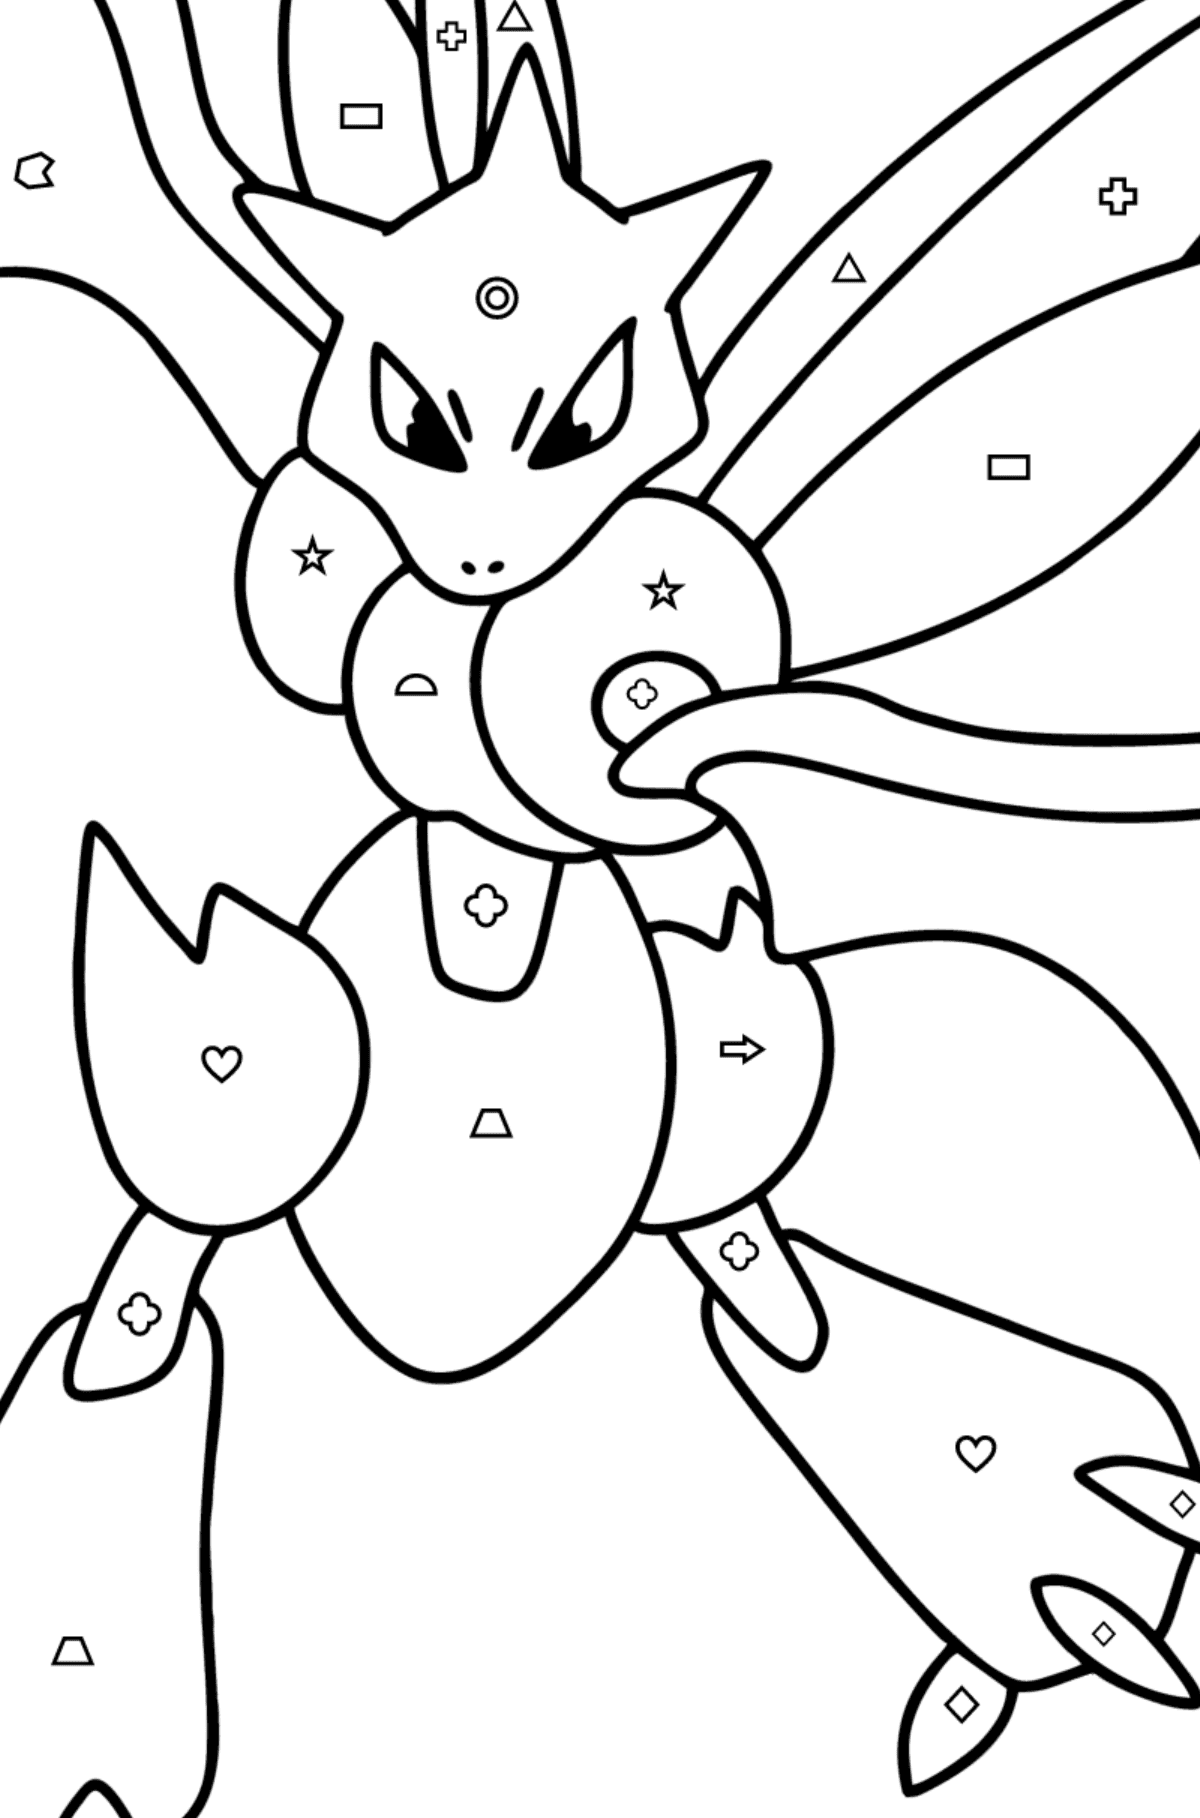 Coloring page Pokemon Go Scyther - Coloring by Geometric Shapes for Kids